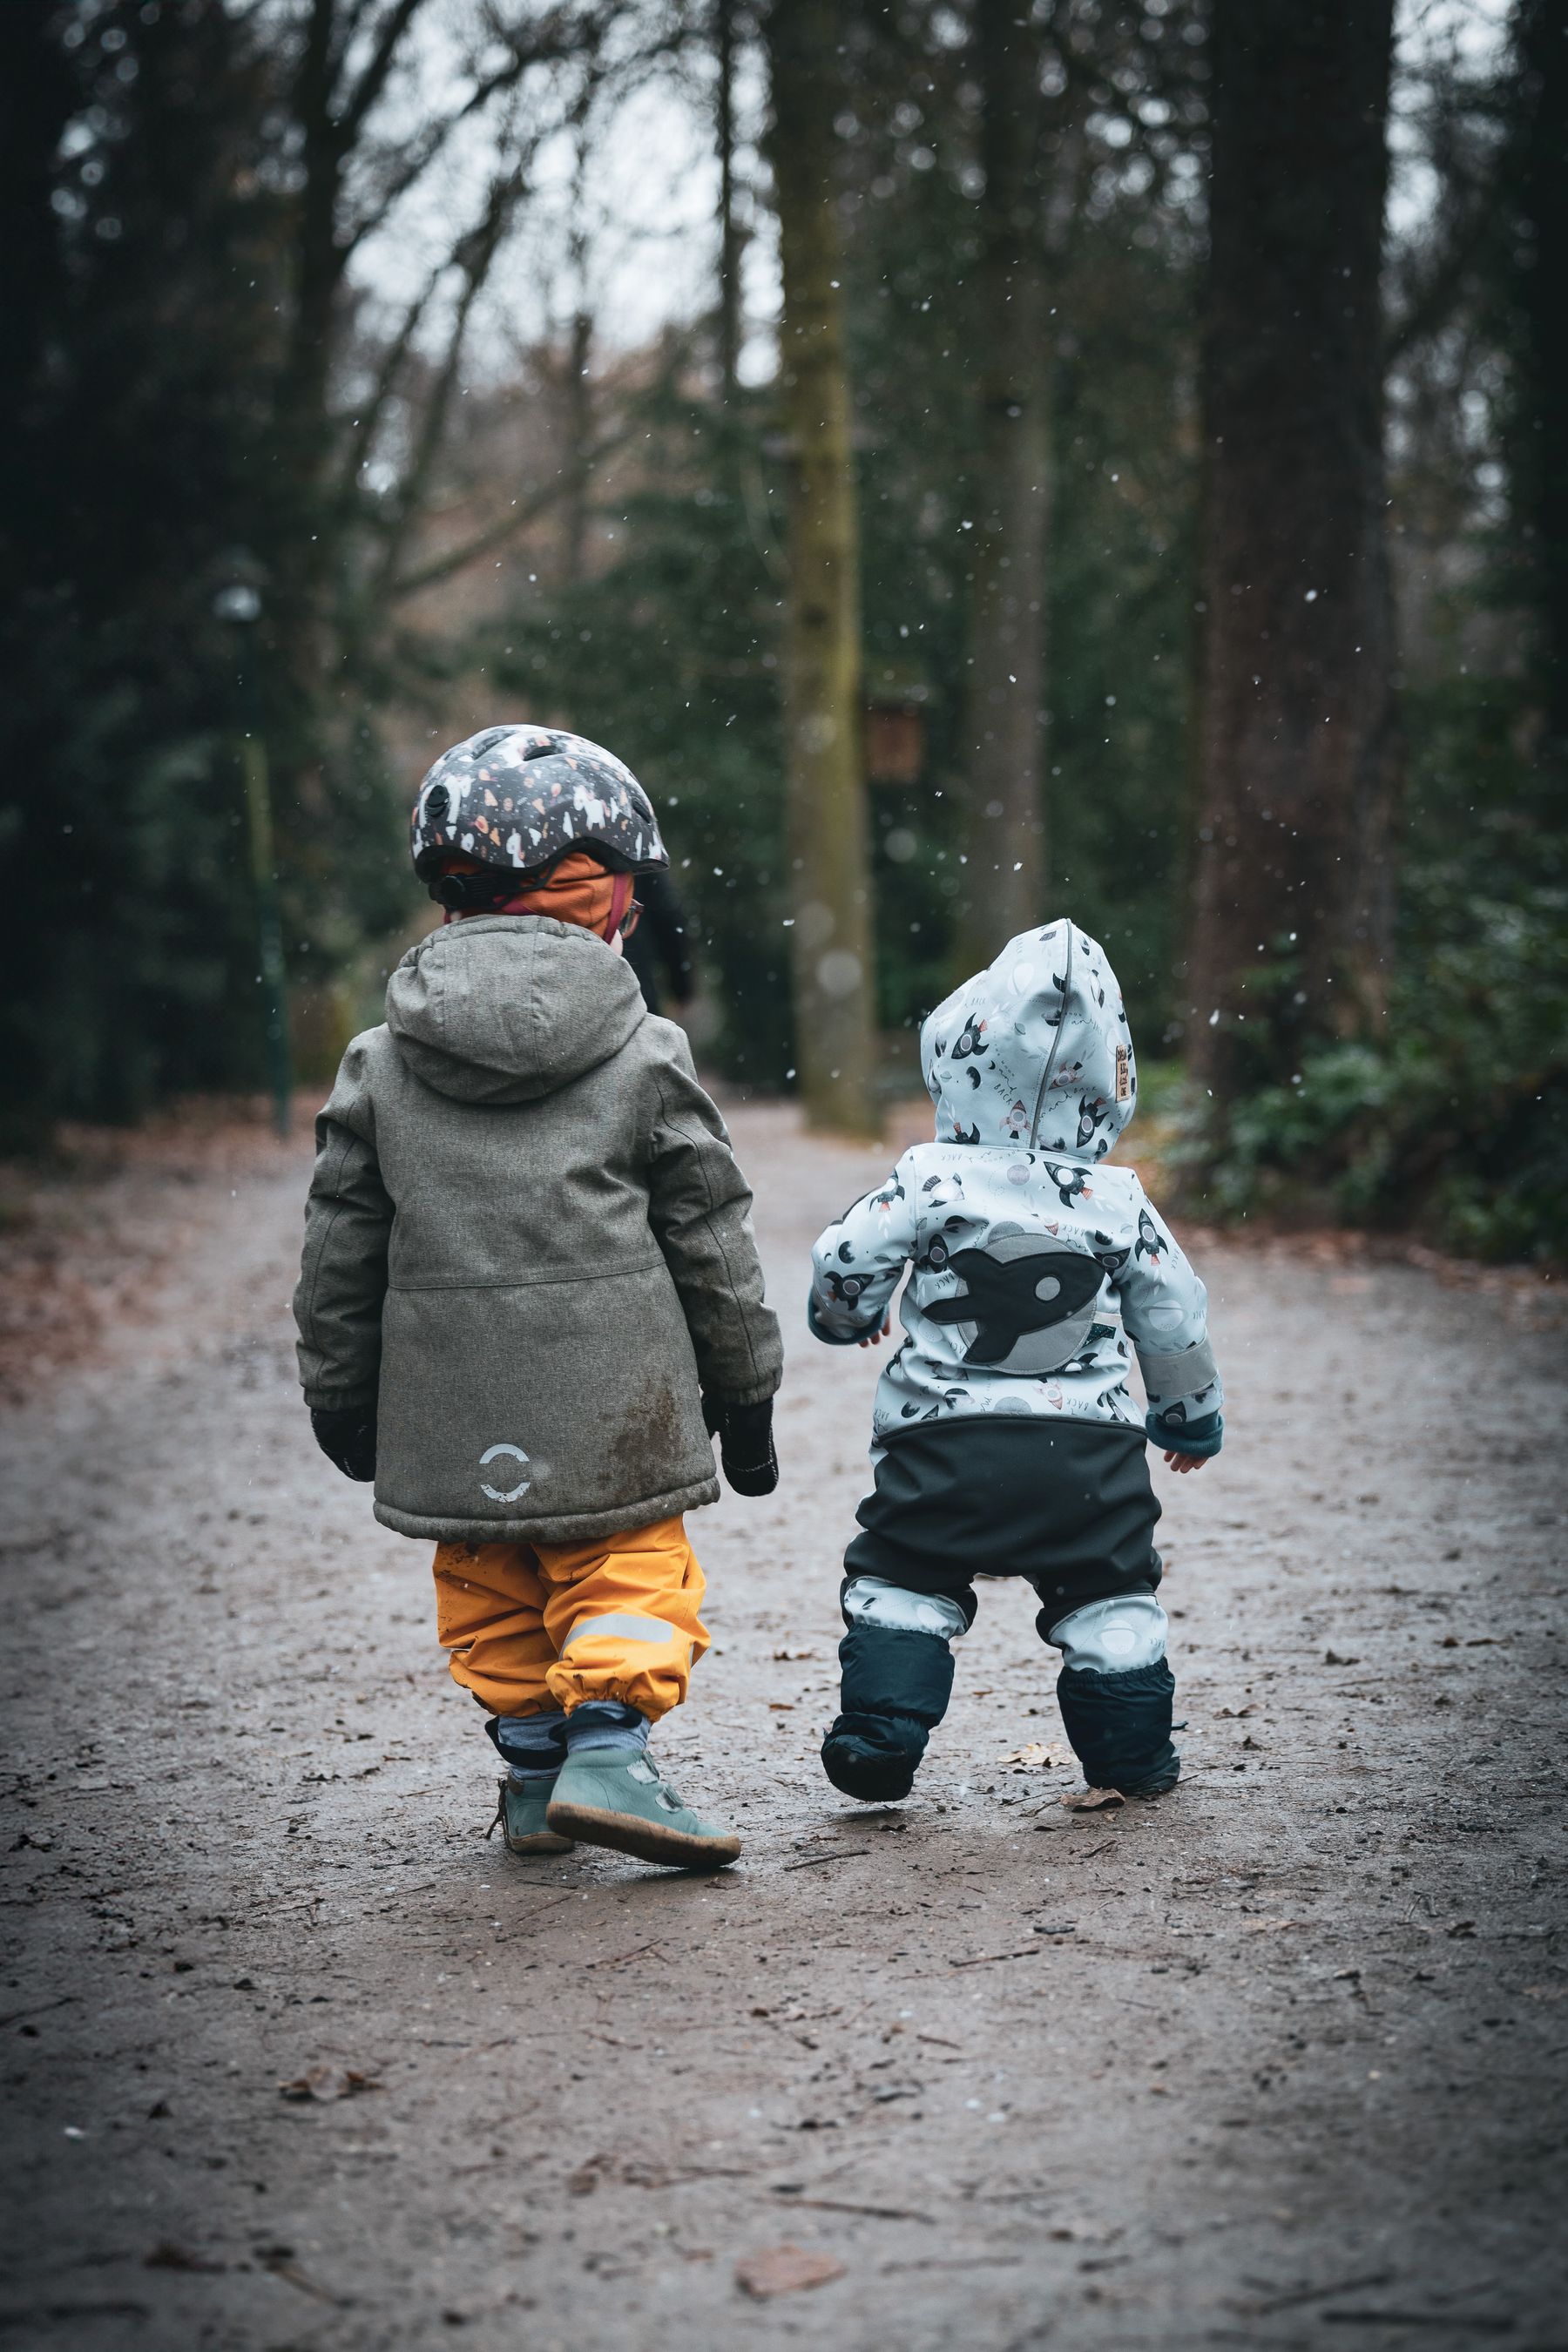 Two small children are walking away from the camera, hand in hand, on a dirt path amid a wooded area. It appears to be winter, as light snowflakes fall around them. The child on the left wears a gray jacket, yellow pants, and a helmet with colorful patterns, while the child on the right dons a white jacket with animal prints, black pants, and a matching white hood. The scene exudes a peaceful and endearing quality.